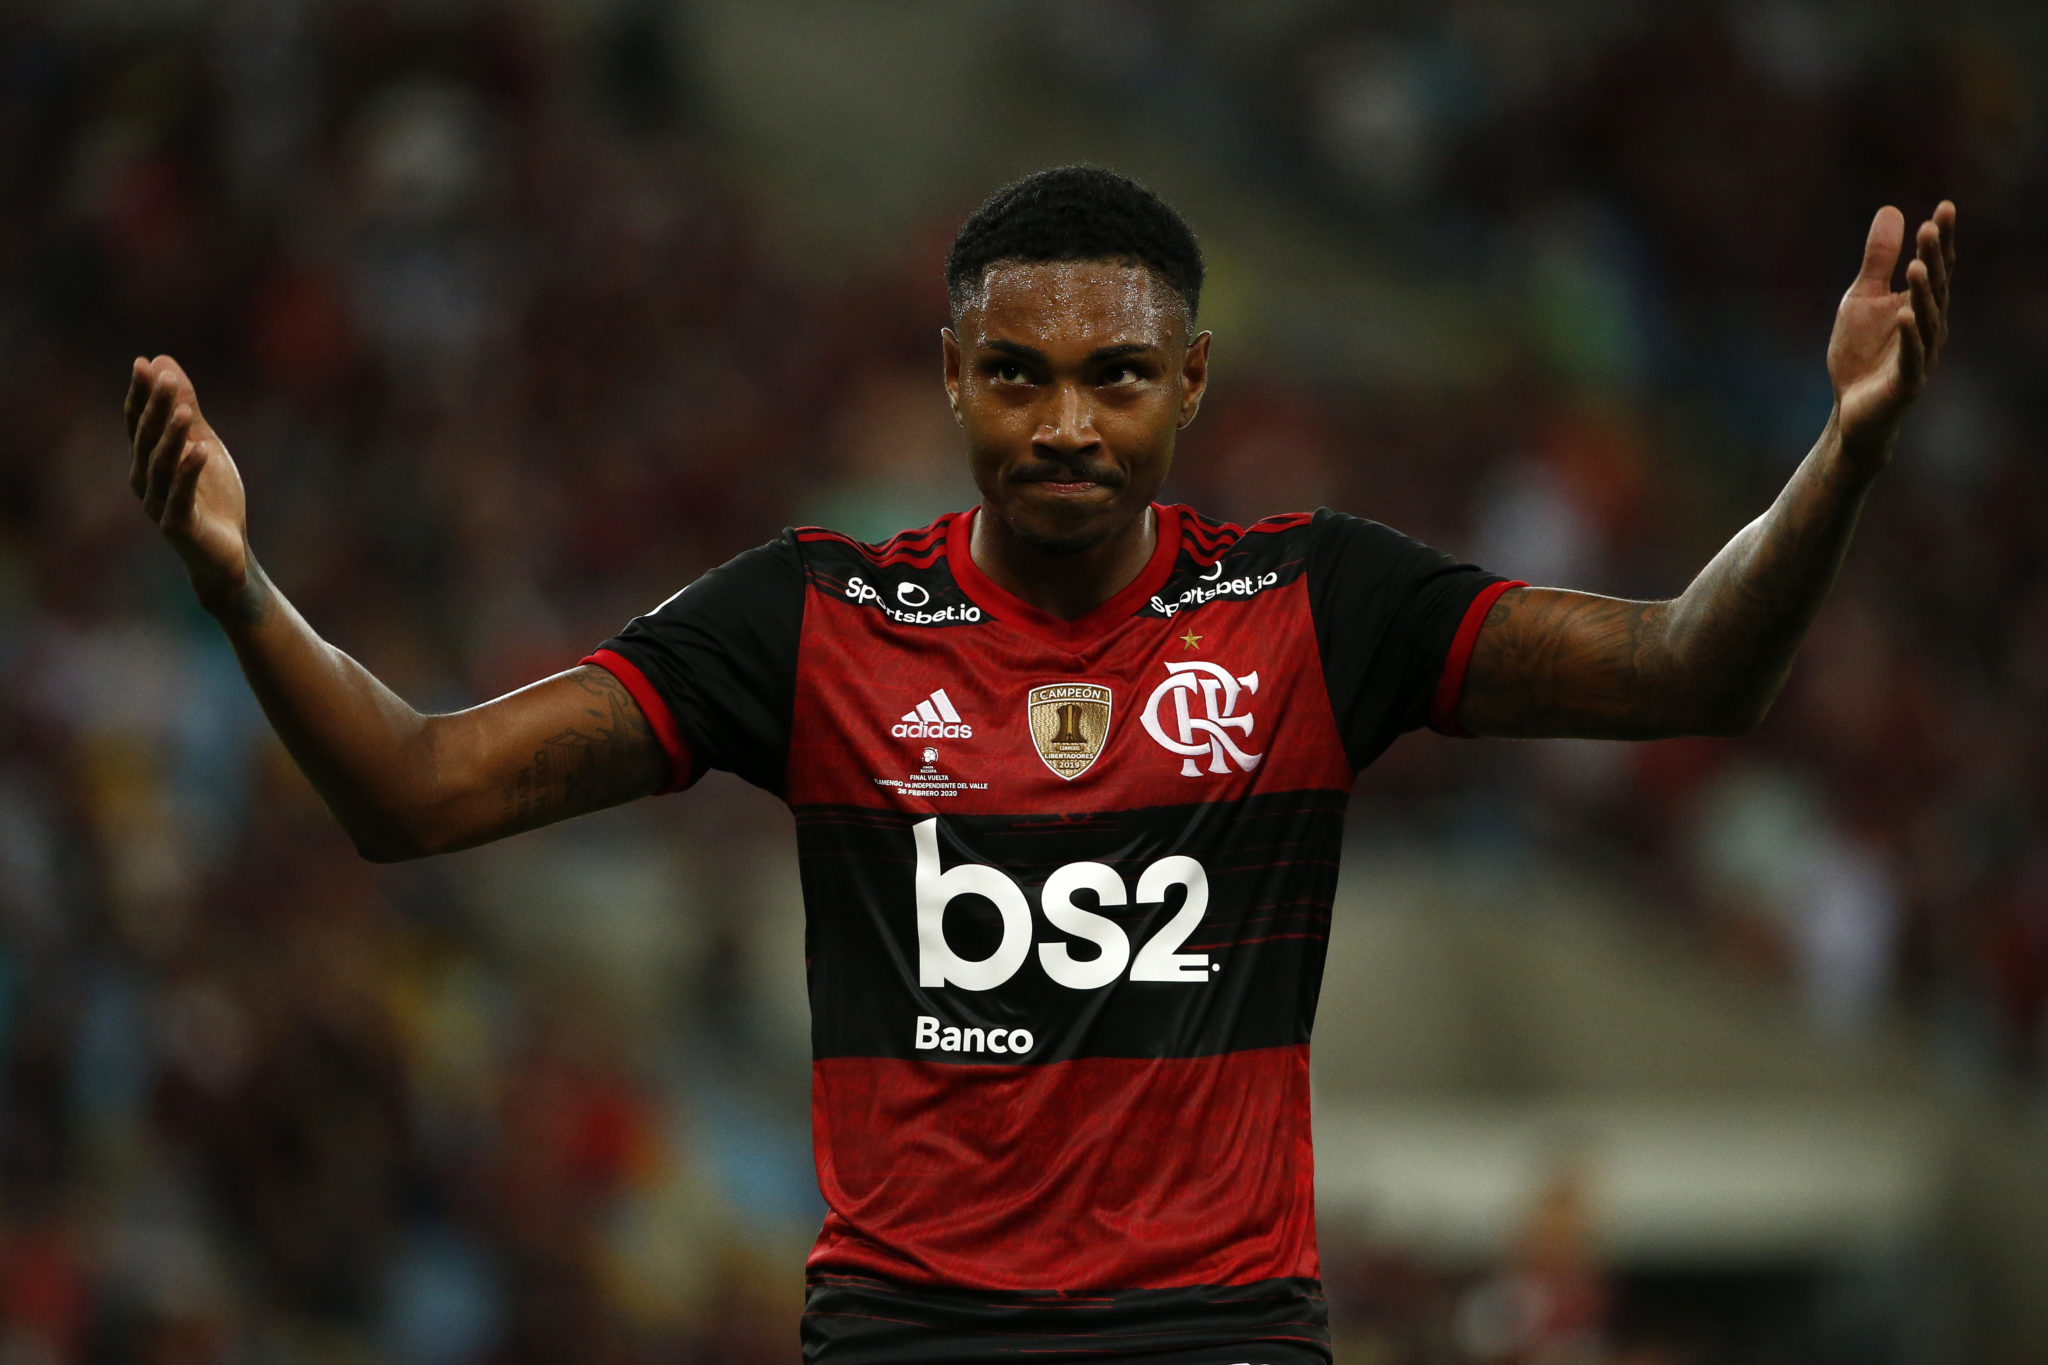 RIO DE JANEIRO, BRAZIL - FEBRUARY 26: Gerson of Flamengo celebrates after scoring the second goal of his team during the second leg match between Flamengo and Independiente del Valle as part of Recopa Sudamericana 2020 at Maracana Stadium on February 26, 2020 in Rio de Janeiro, Brazil. (Photo by Bruna Prado/Getty Images)